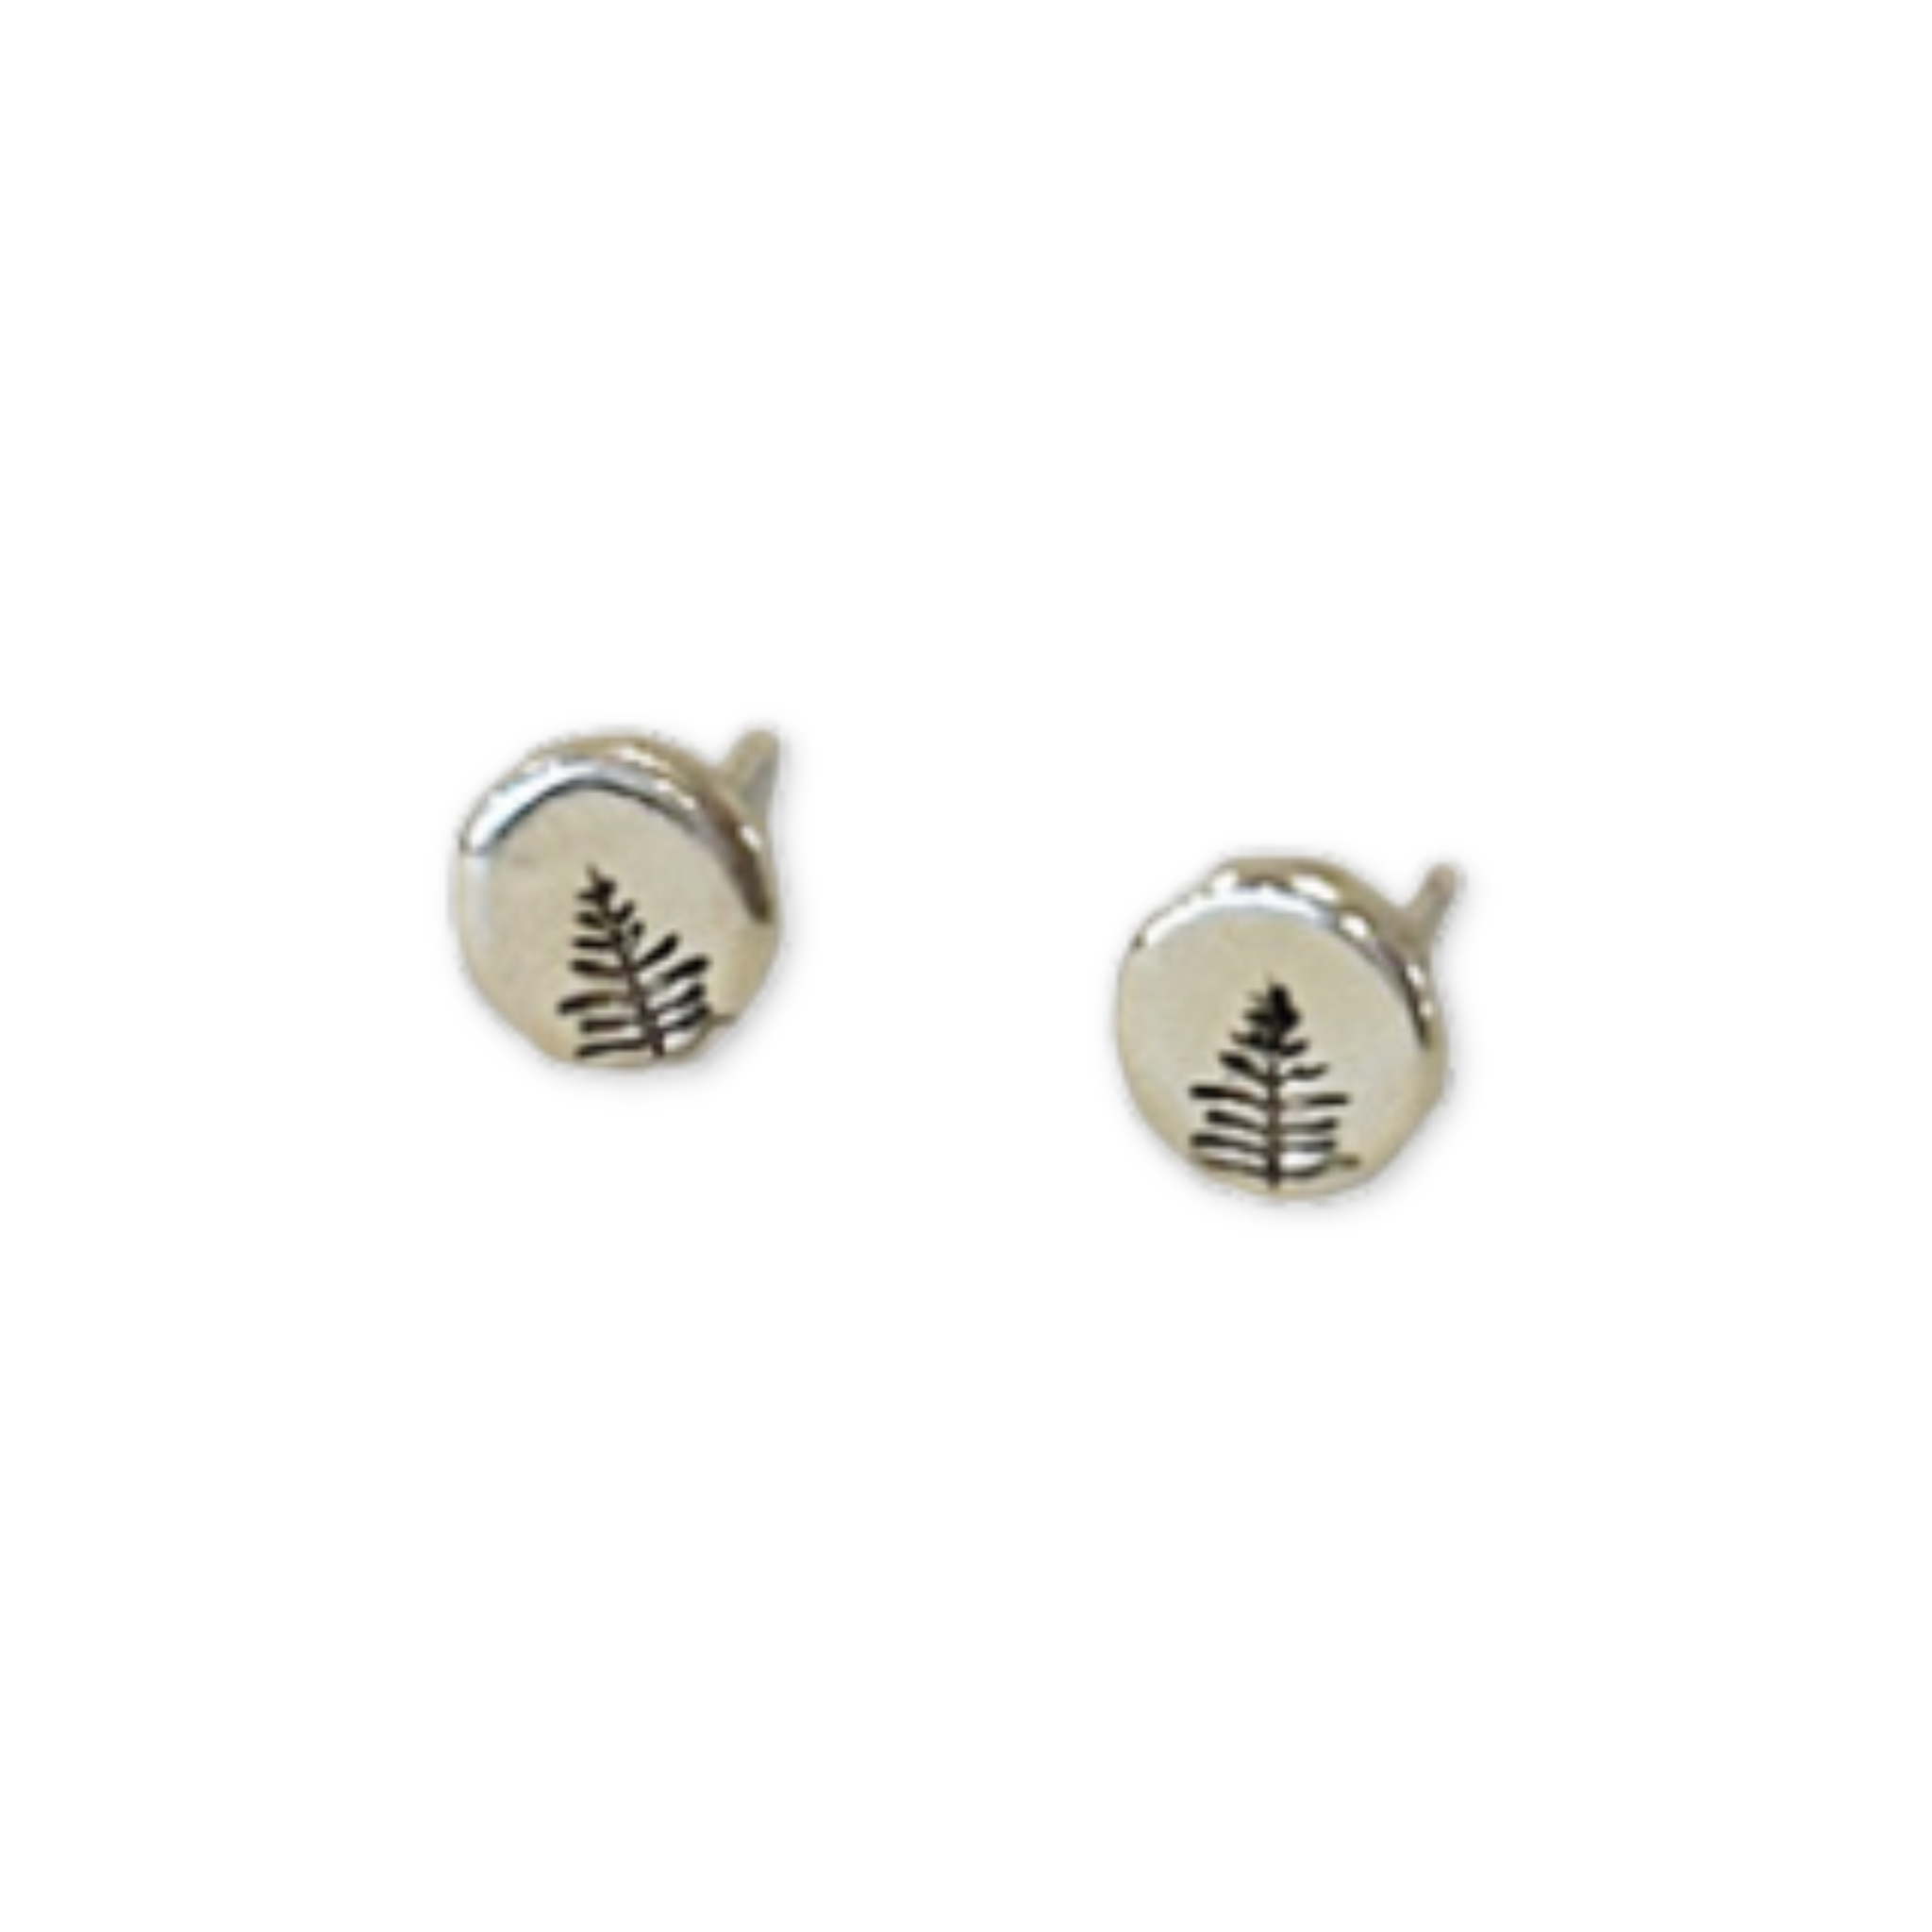 silver stud earrings with a pine tree design